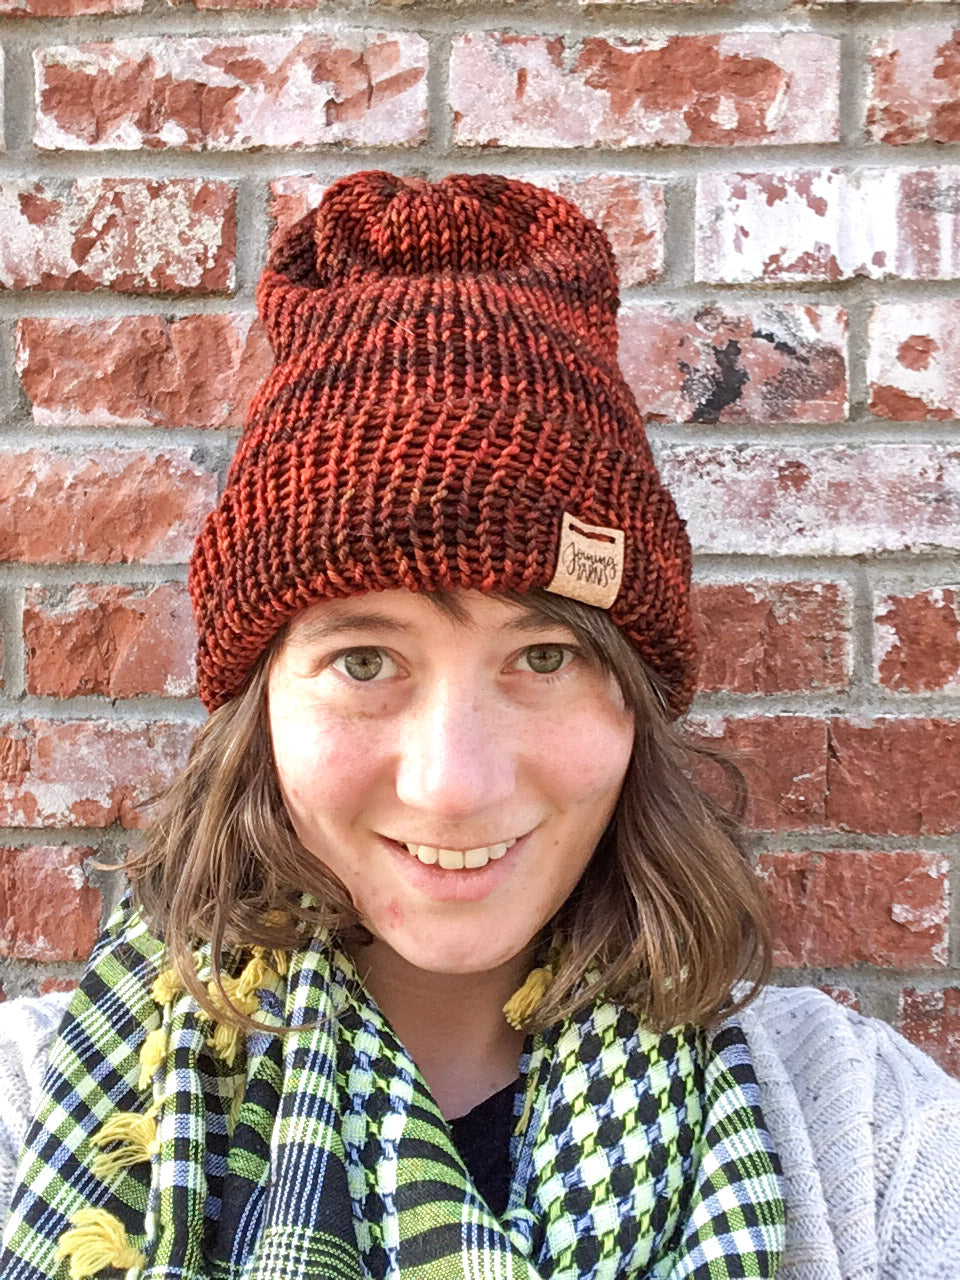 The Hadrosaur Hat is a lightweight, double layered slouchy beanie with folded brim.  It is shown here in orange/brown on a model.